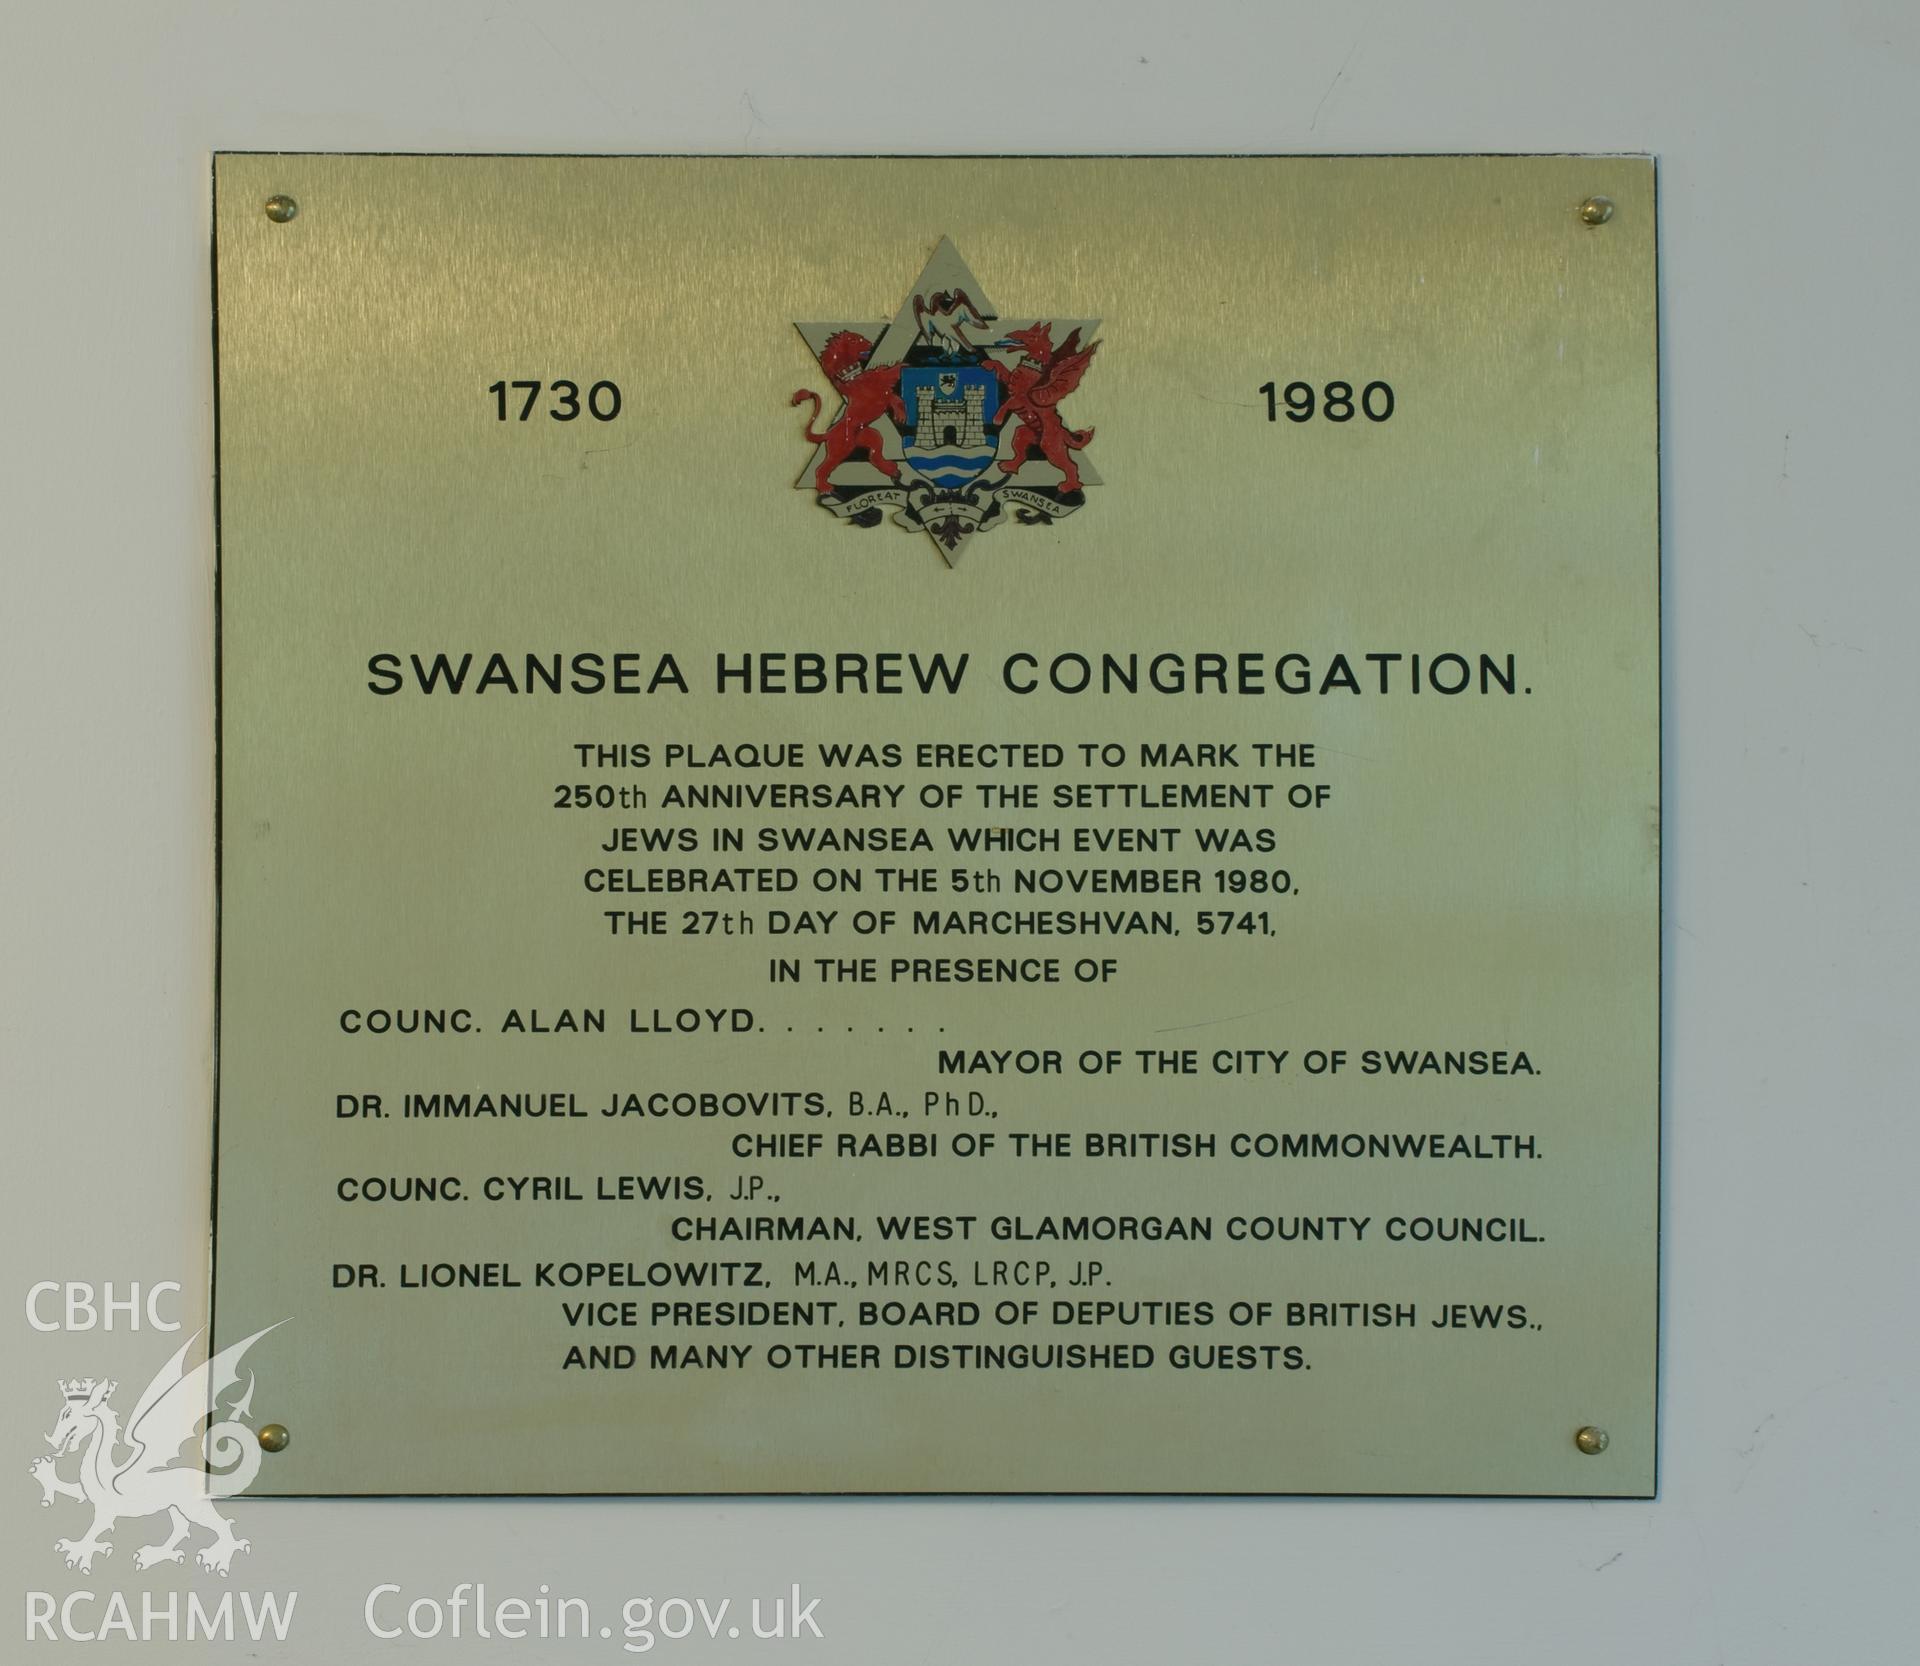 Memorial to the anniversary of Jewish settlement in Swansea.